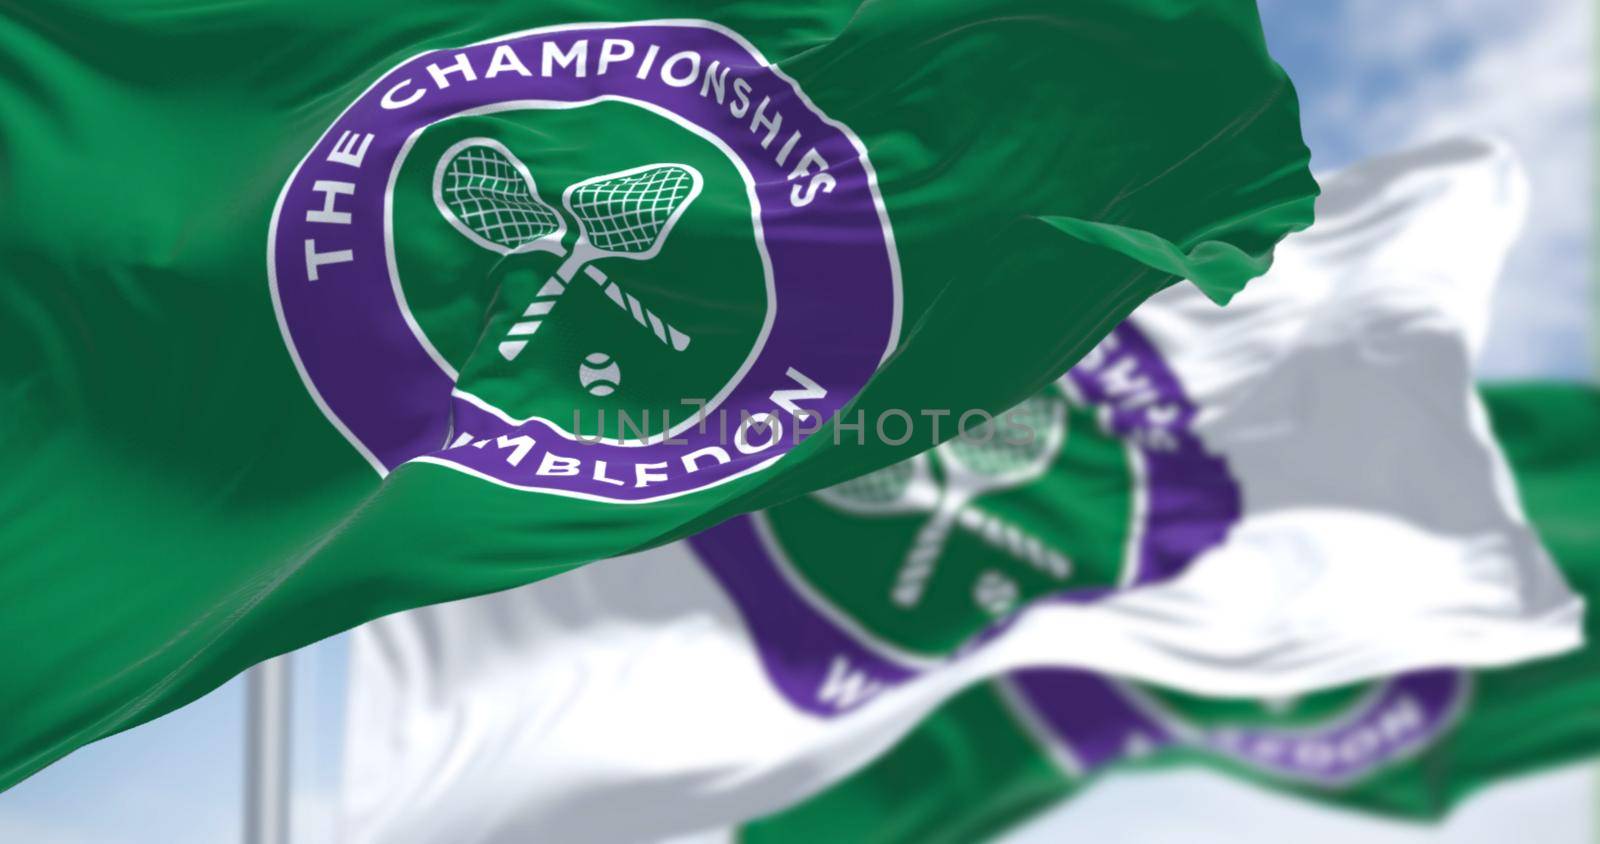 London, UK, April 2022: three flags with the The Championships Wimbledon logo waving in the wind by rarrarorro